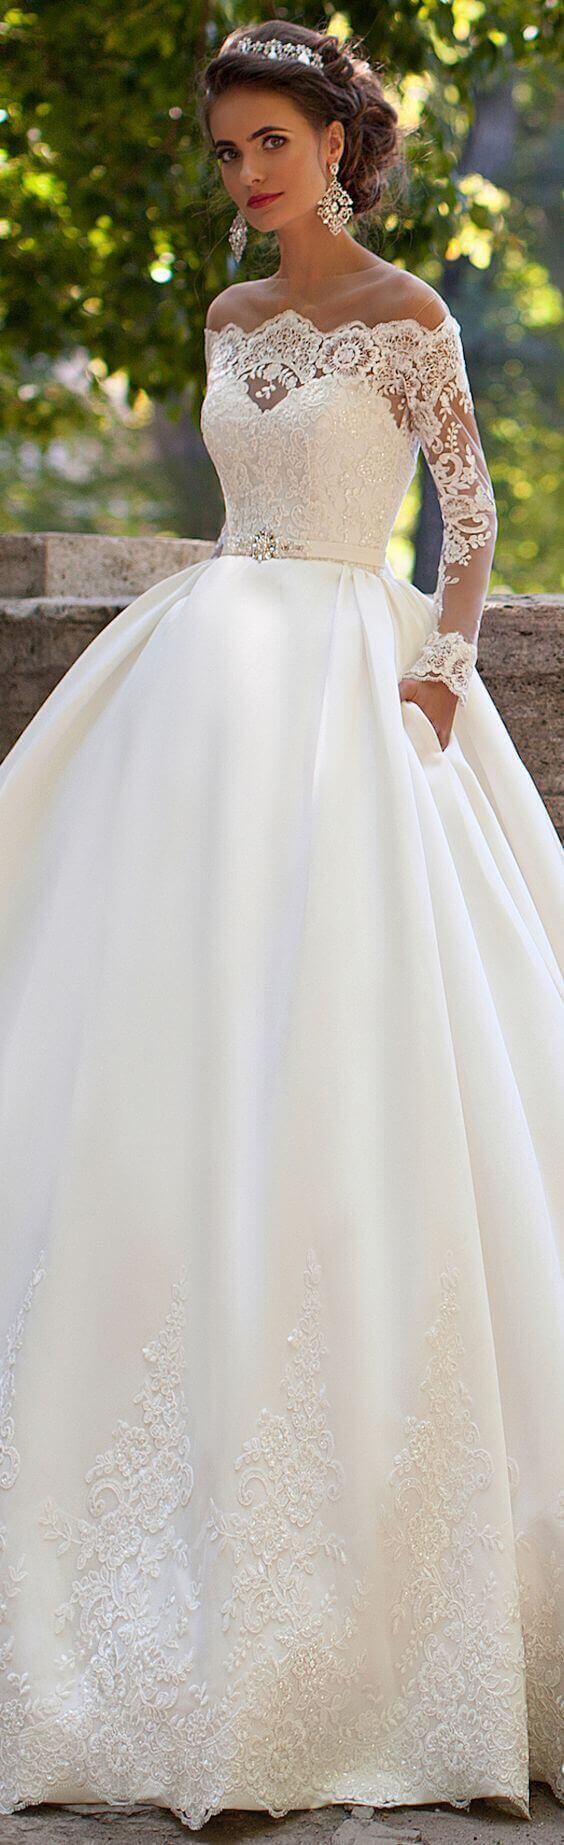 We have some good examples here among these wedding gown 47 suggestions and hope at least one fits your idea of THE bridal gown, as we did our best! There’s more wedding planning help at wedwithbliss.com